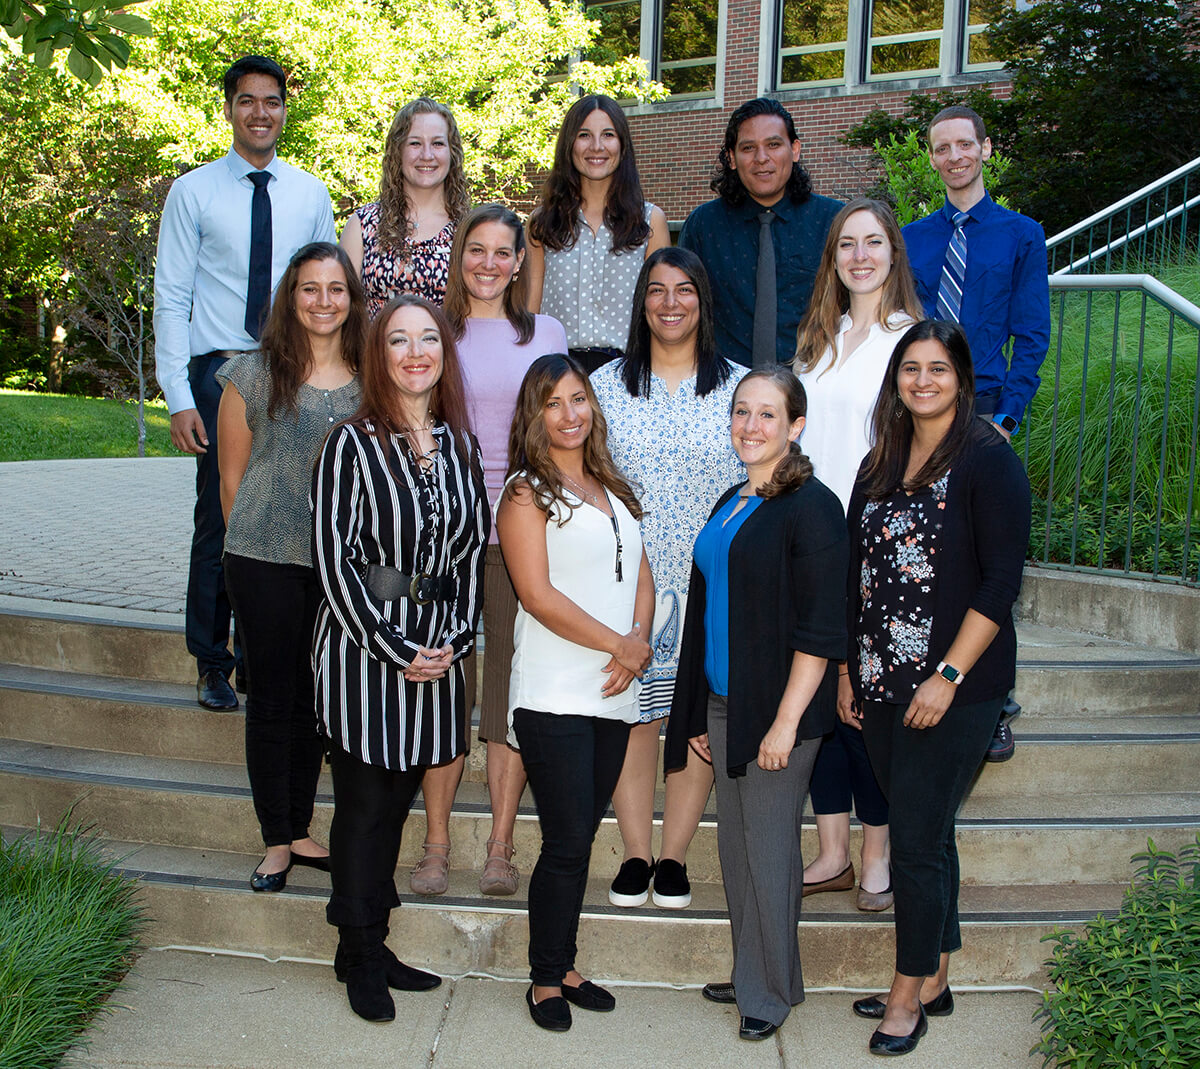 Clinical residents and cardiology intern pictured